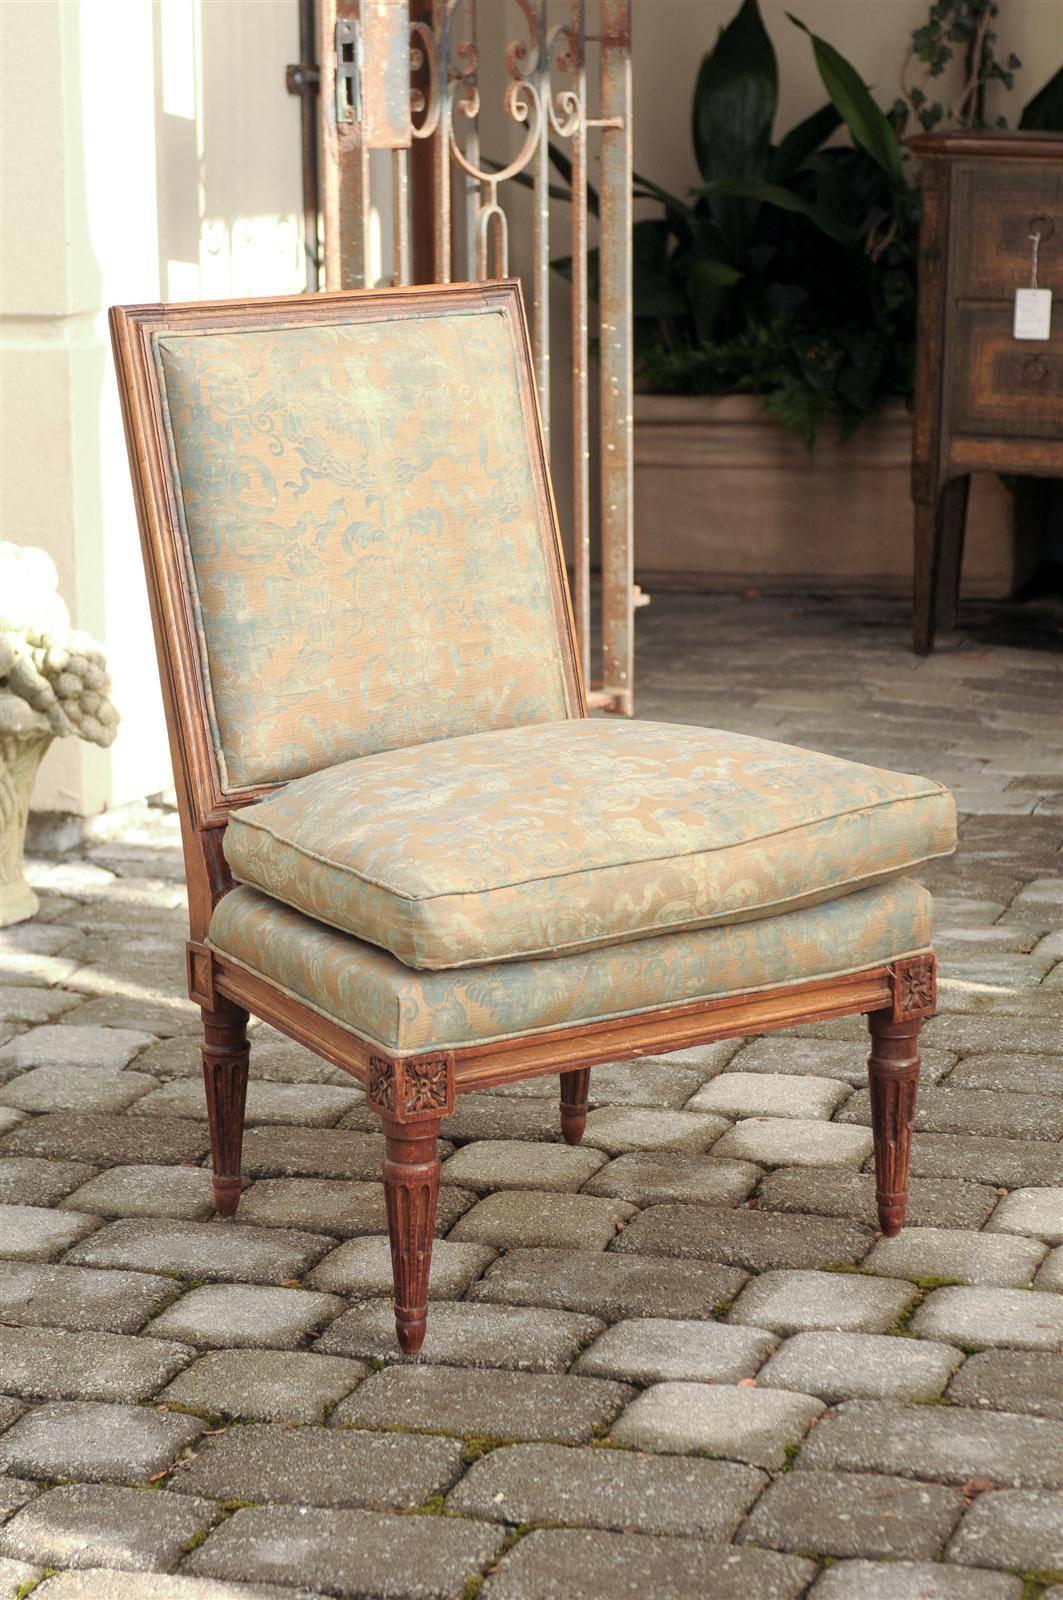 This French Louis XVI style upholstered slipper chair from the turn of the century (19th to 20th) features a rectangular slanted back over four fluted and tapered legs, adorned with small rosette motifs on the knees, typical of the Louis XVI style.